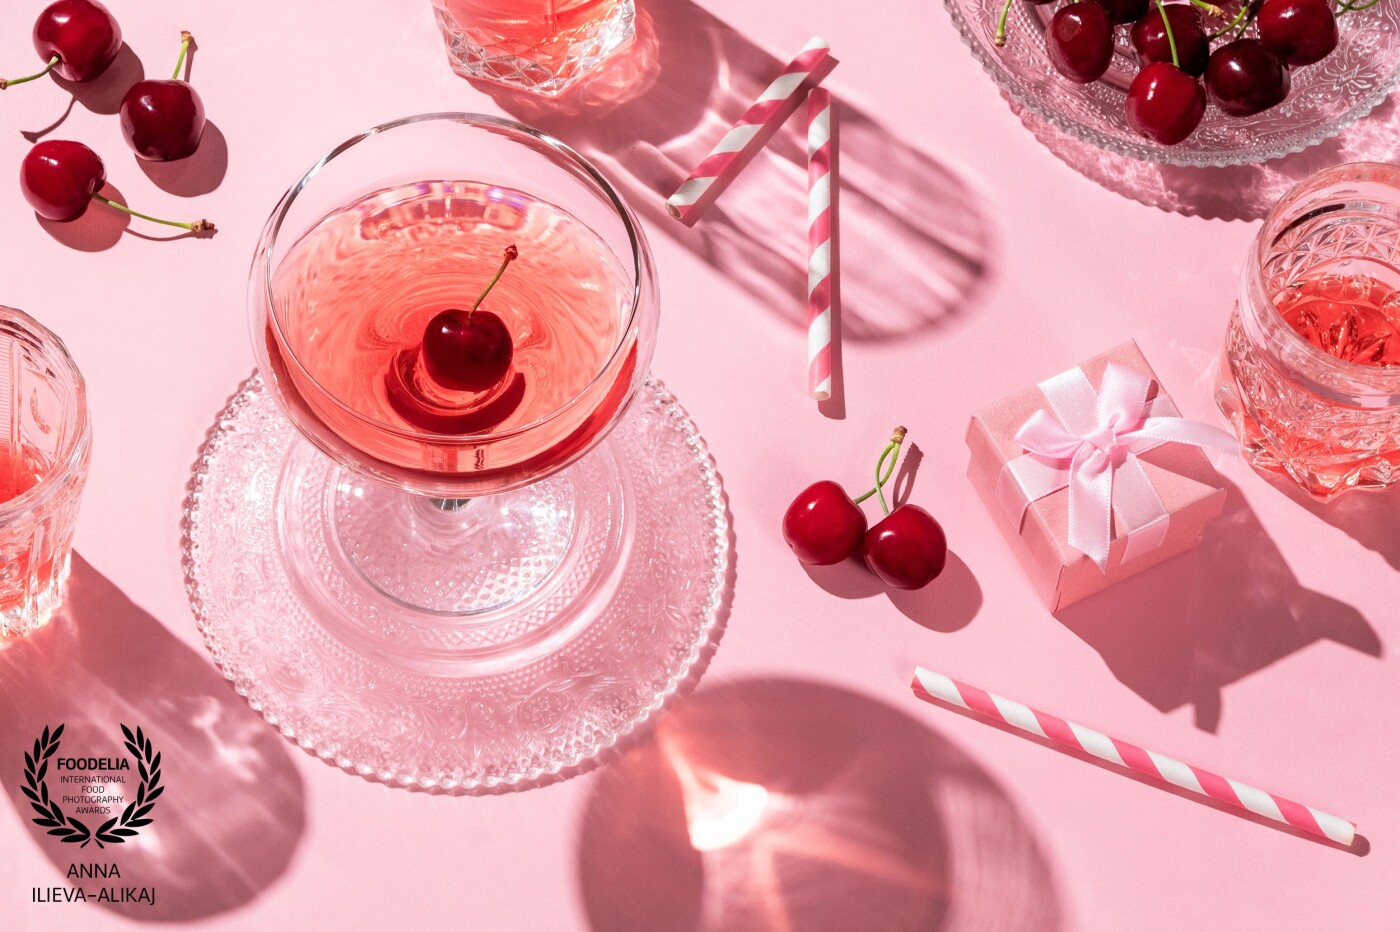 Hopeless, romantic happy hour. The long shadows recall the evening and the cherries, together with the pink background, speak only of love.